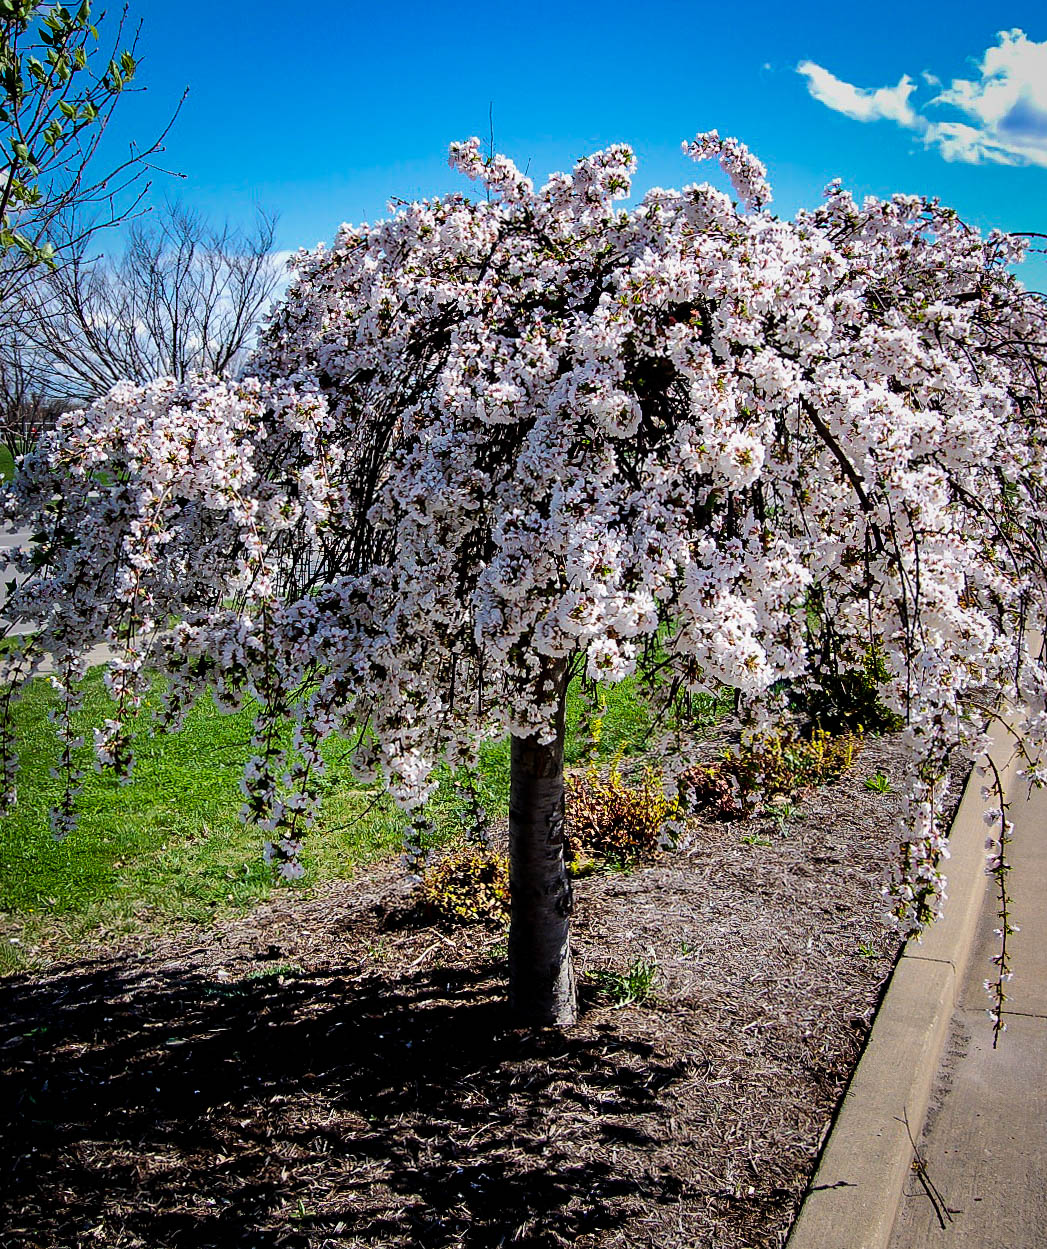 Snow Fountains Weeping Cherry Trees For Sale The Tree Center